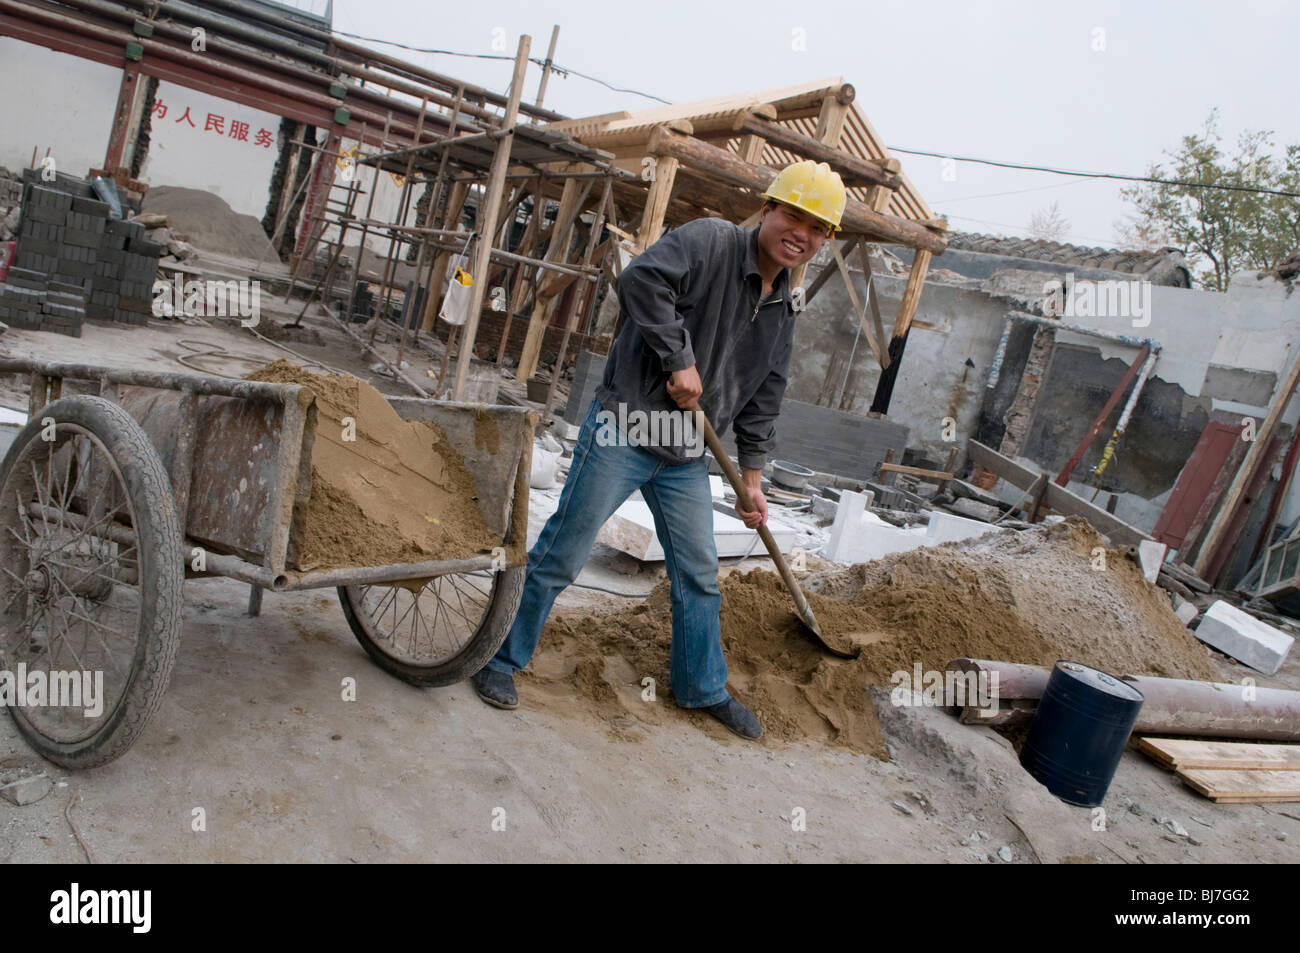 Construction labourer working on the restoration of a hutong in Beijing Stock Photo